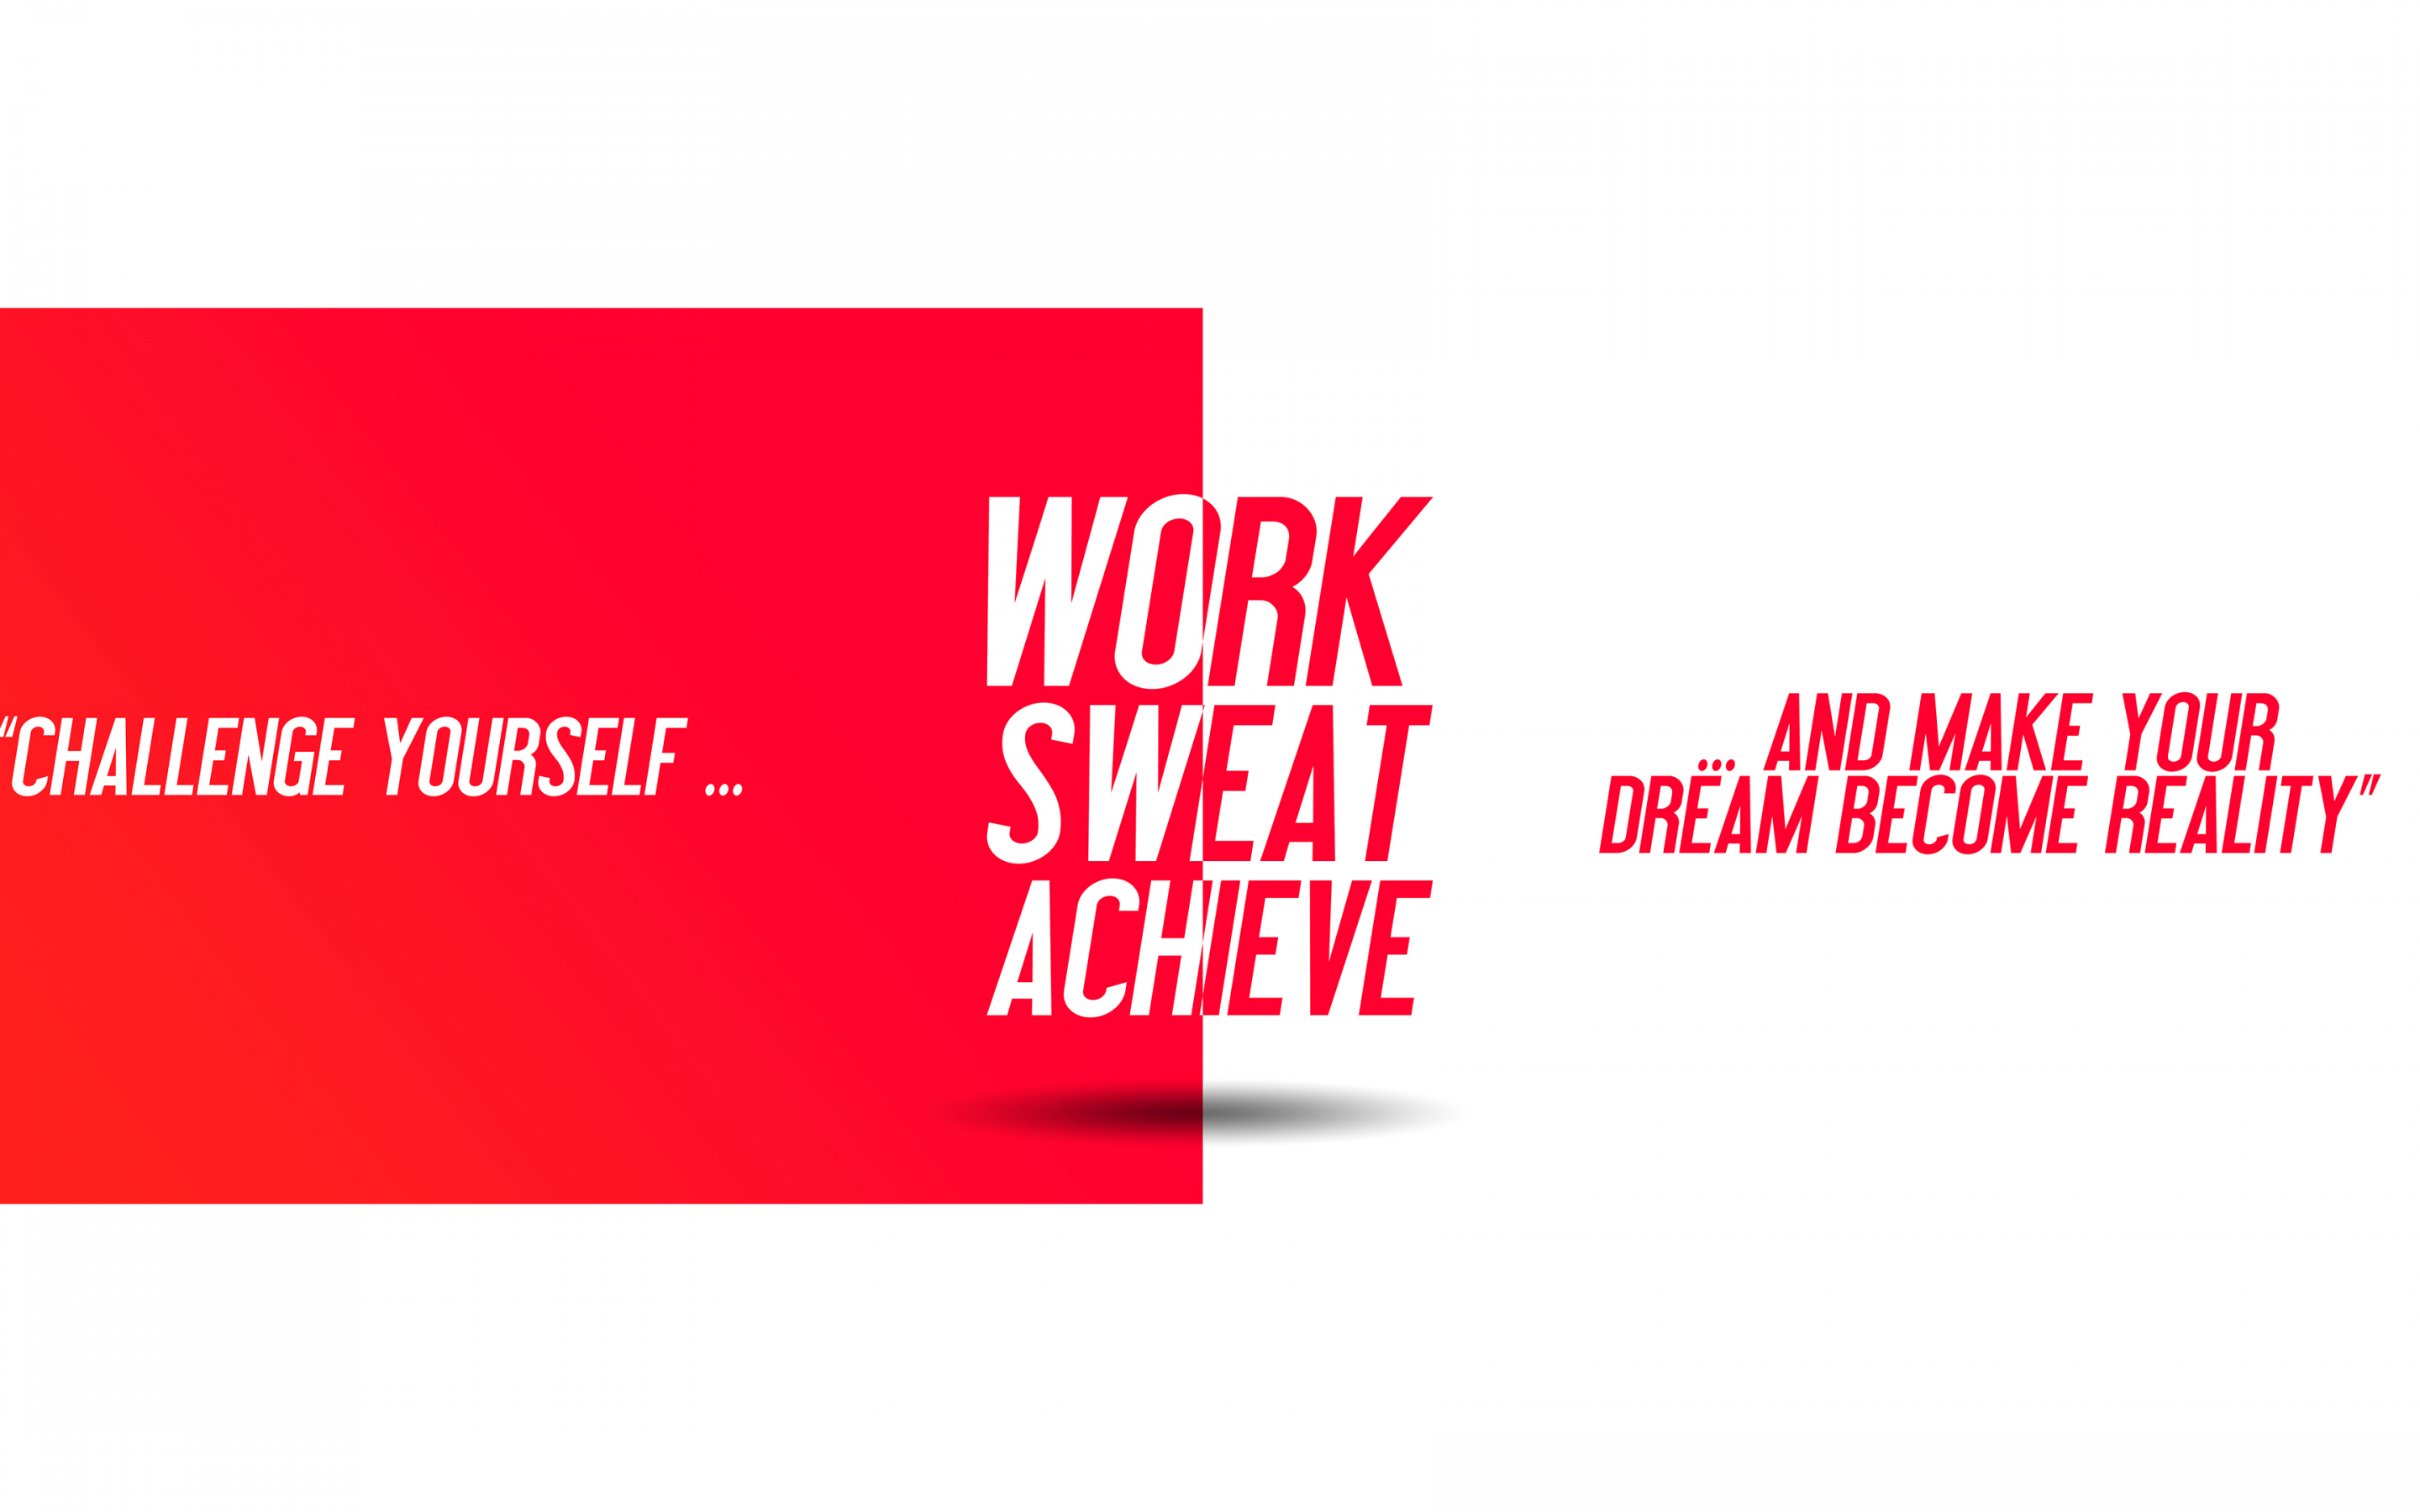 Challenge yourself 4K Wallpaper, Make your Dream become Reality, Work, Sweat, Achieve, Red, Quotes